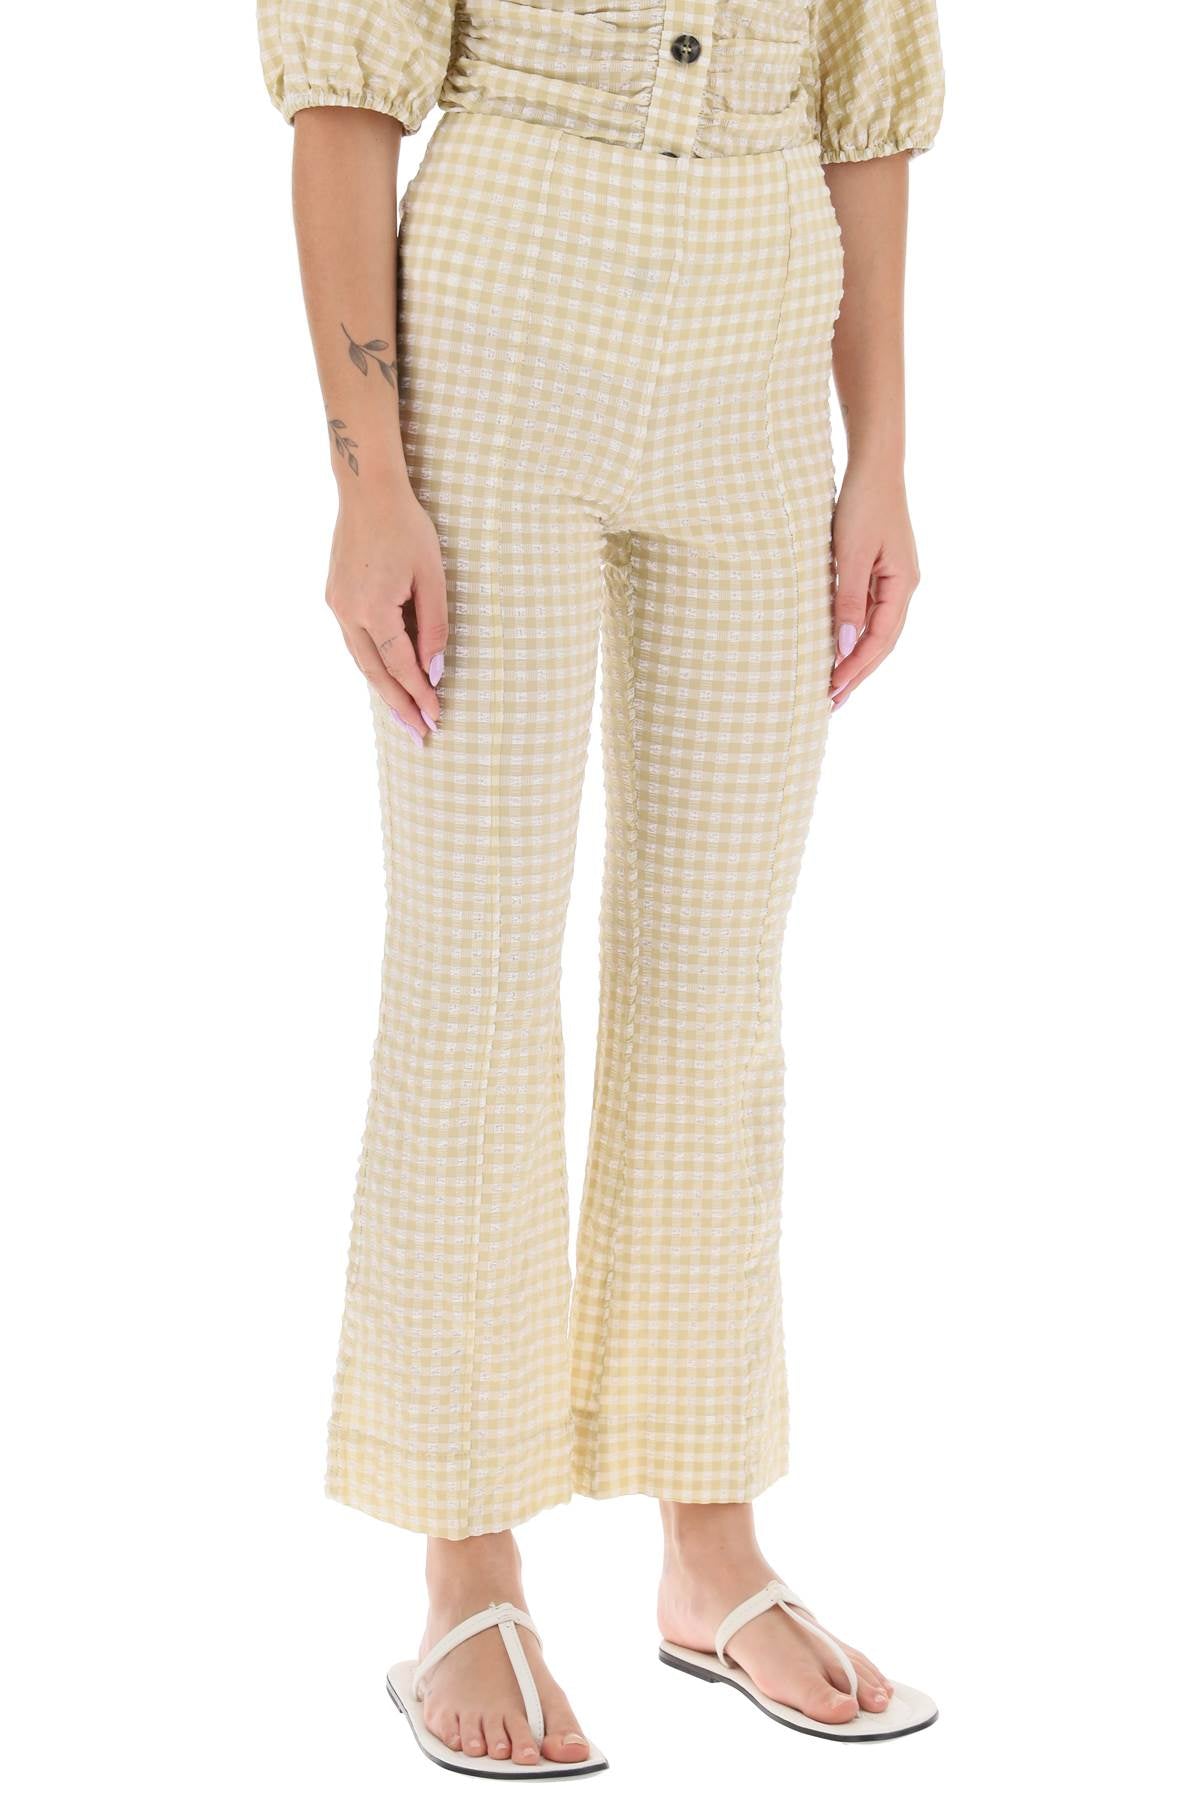 Ganni flared pants with gingham motif-1